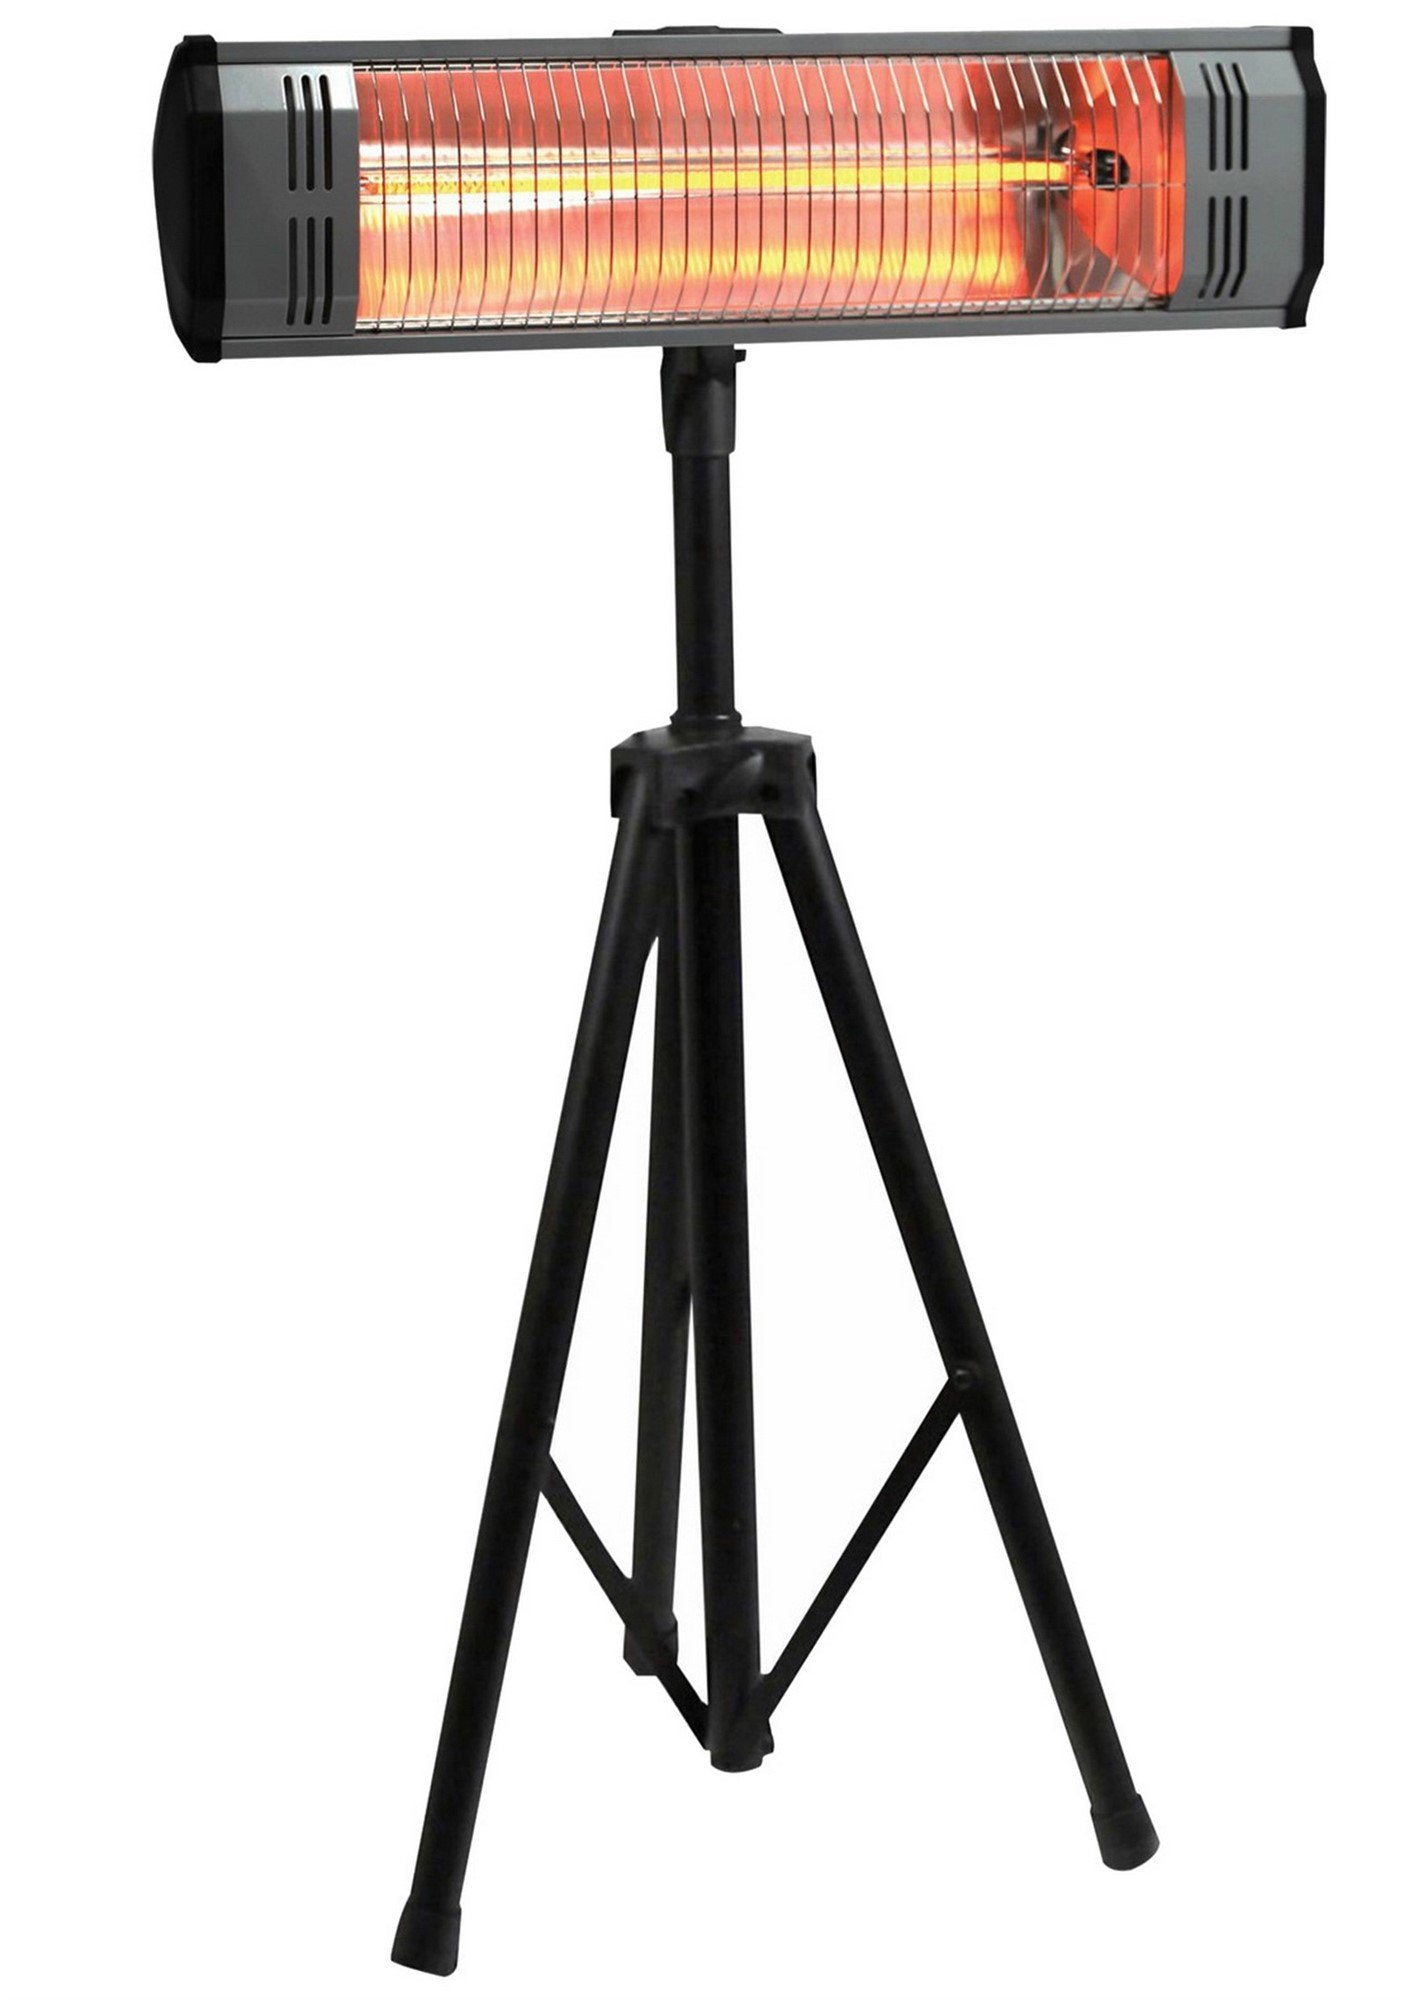 1500W Electric Outdoor Infrared Space Heater Portable with Tripod Heat Storm